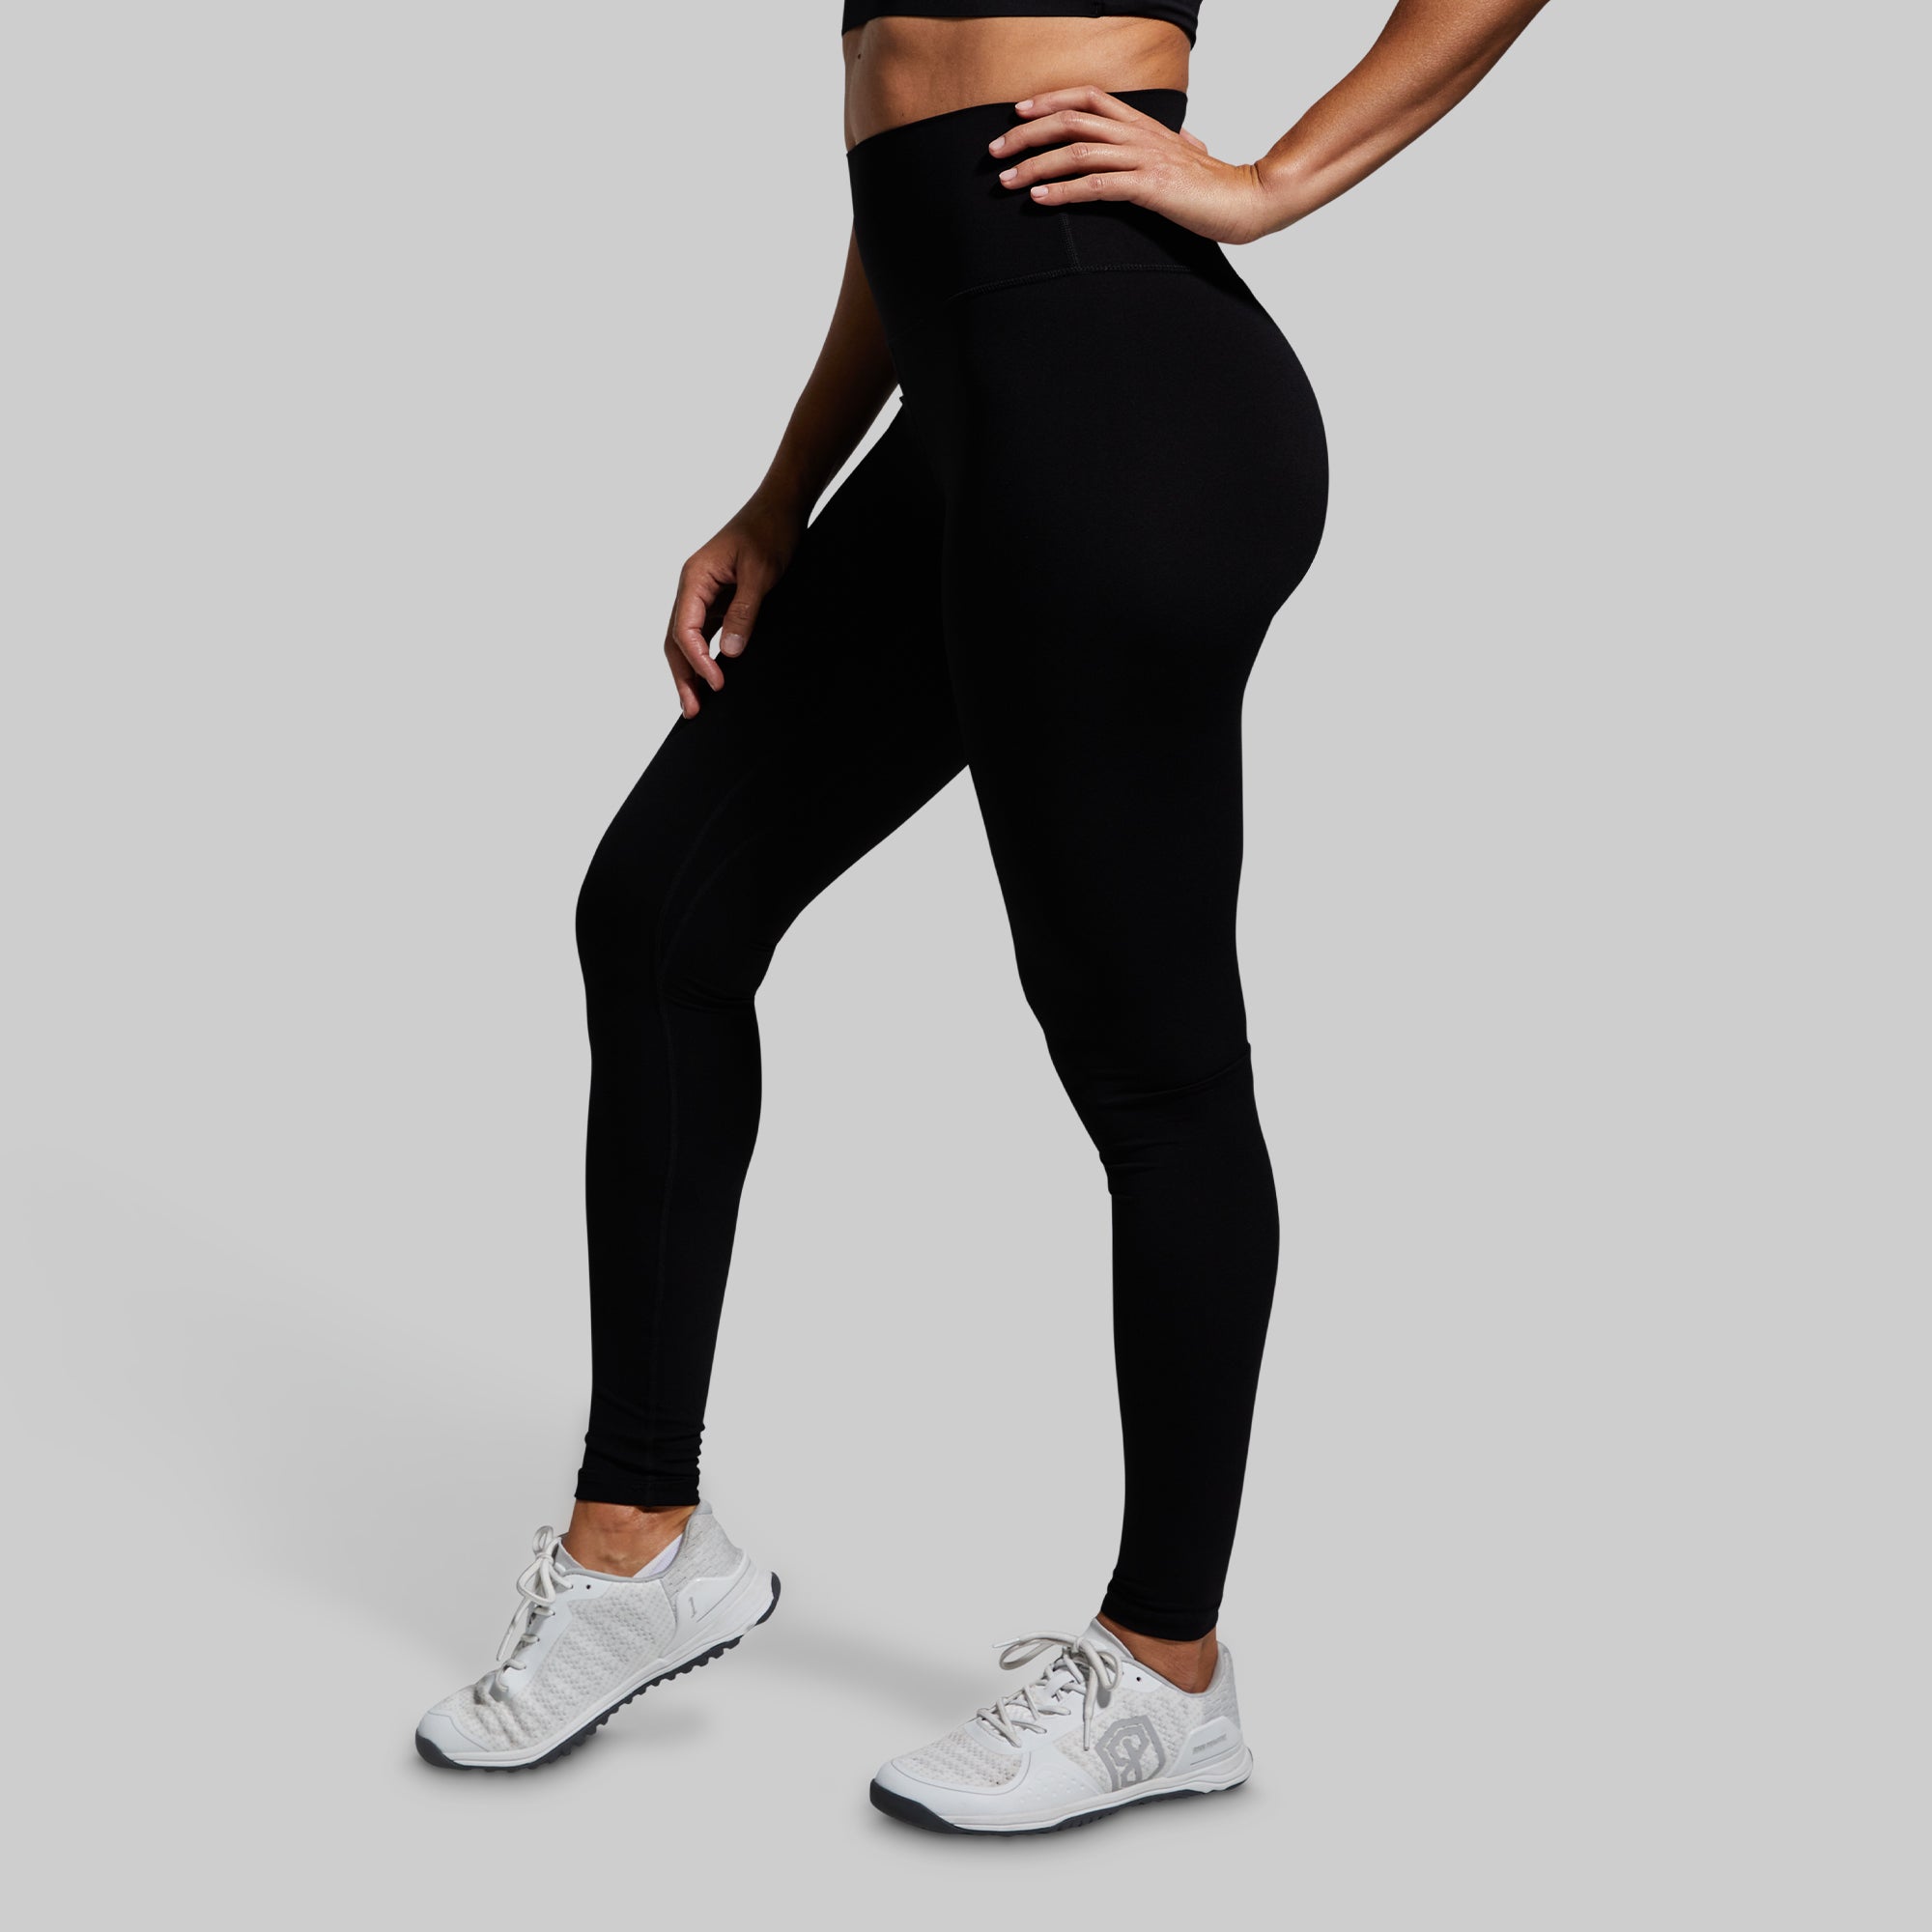 YOU WILL BE HOOKED ONCE YOU TRY THESE LEGGINGS - 50 IS NOT OLD - A